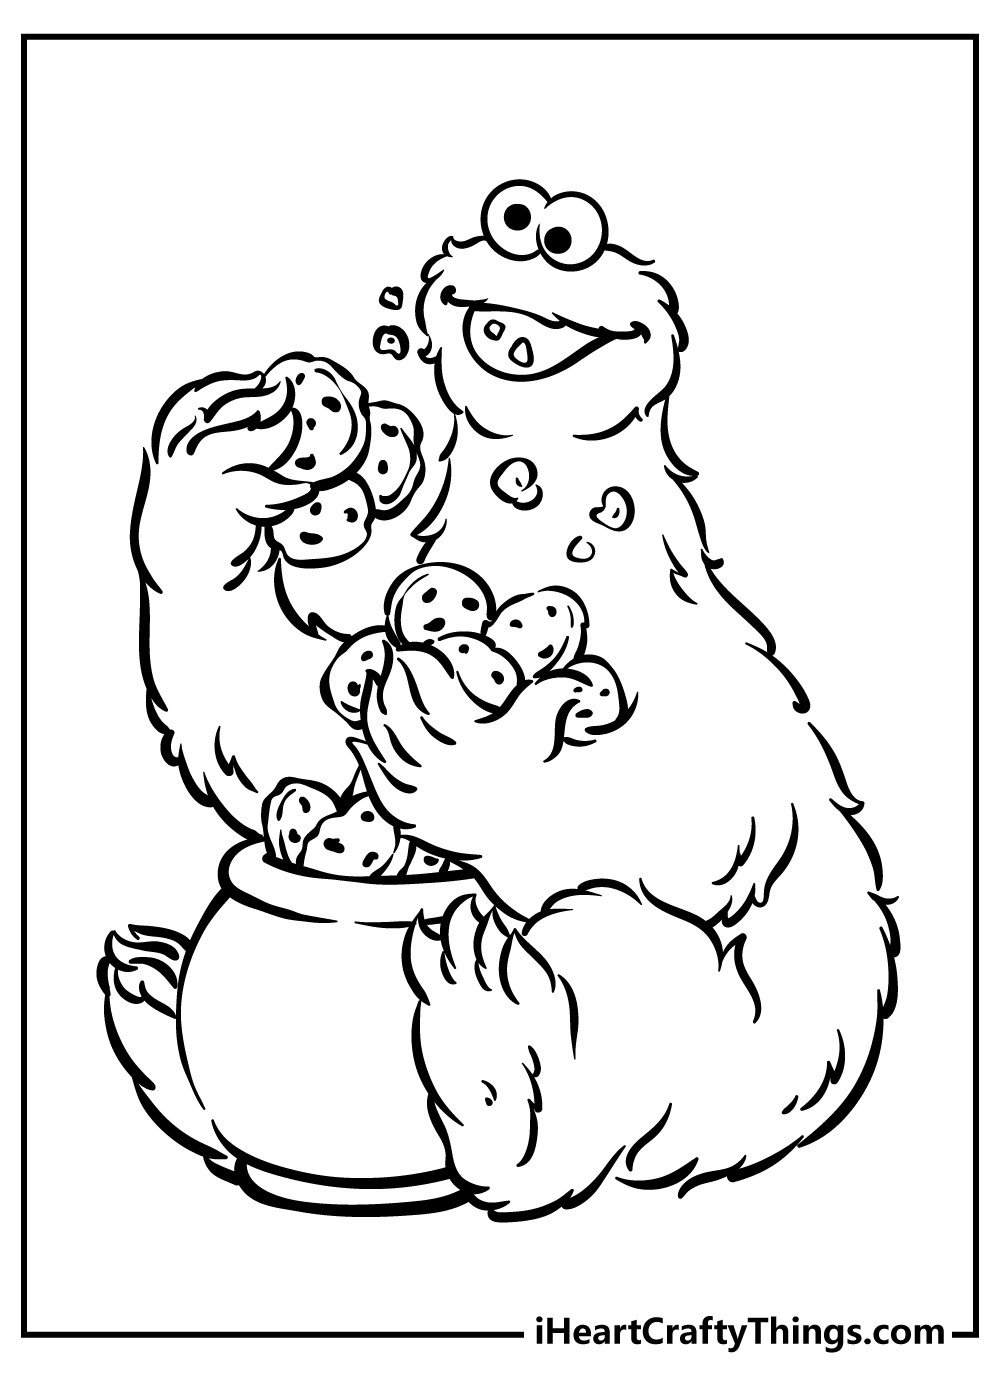 Sesame Street Coloring Pages free pdf download